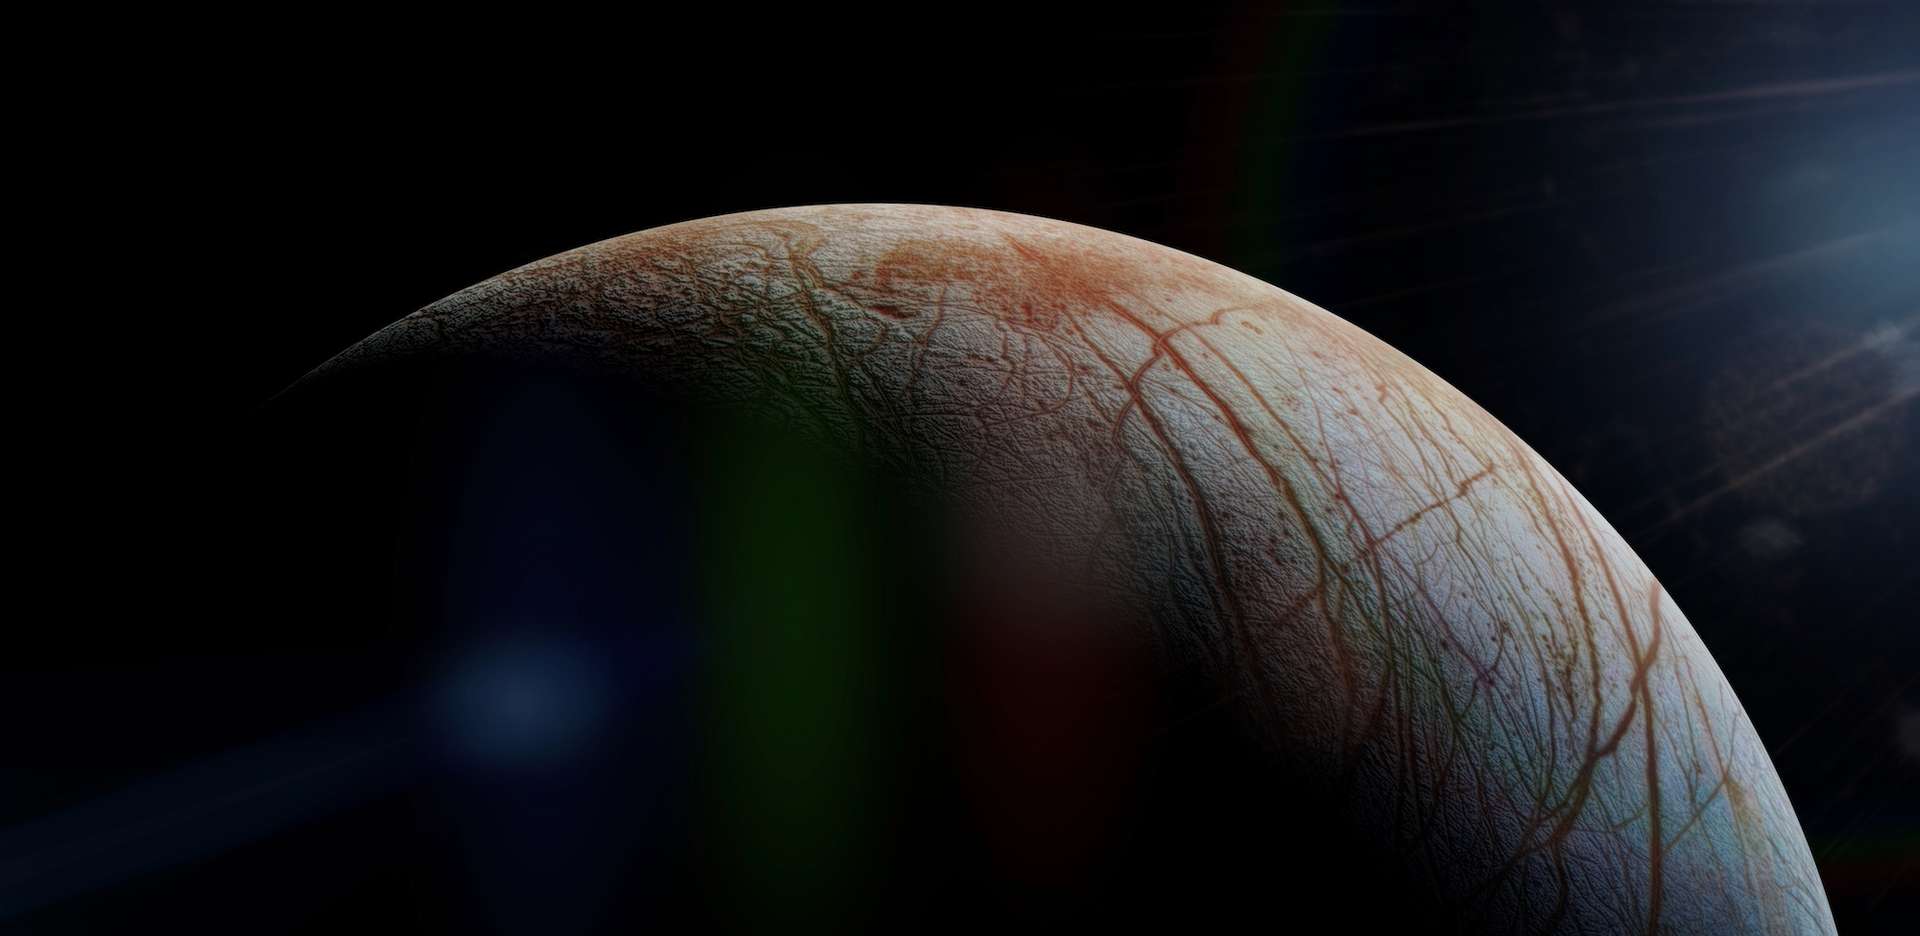 James Webb discovered the presence of life-usable carbon in the vicinity of Jupiter’s moon Europa